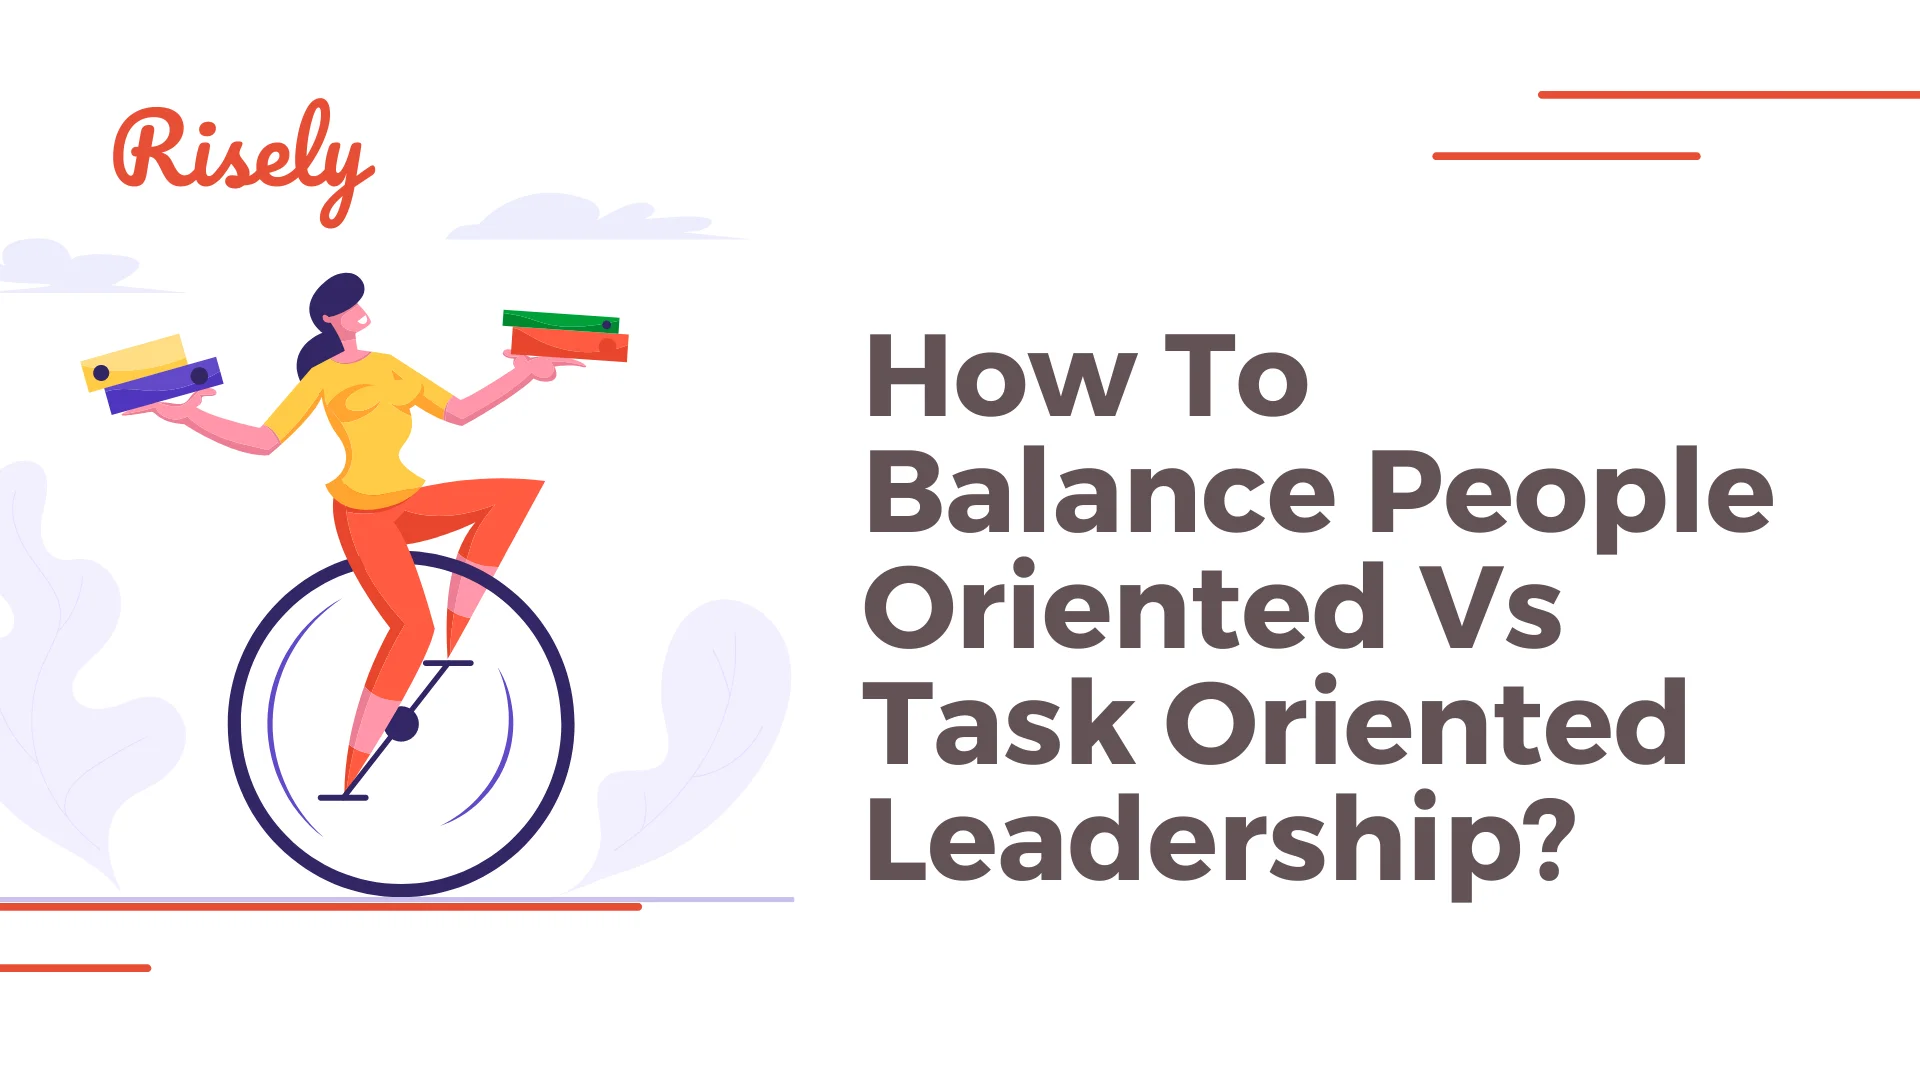 How To Balance People Oriented Vs Task Oriented Leadership